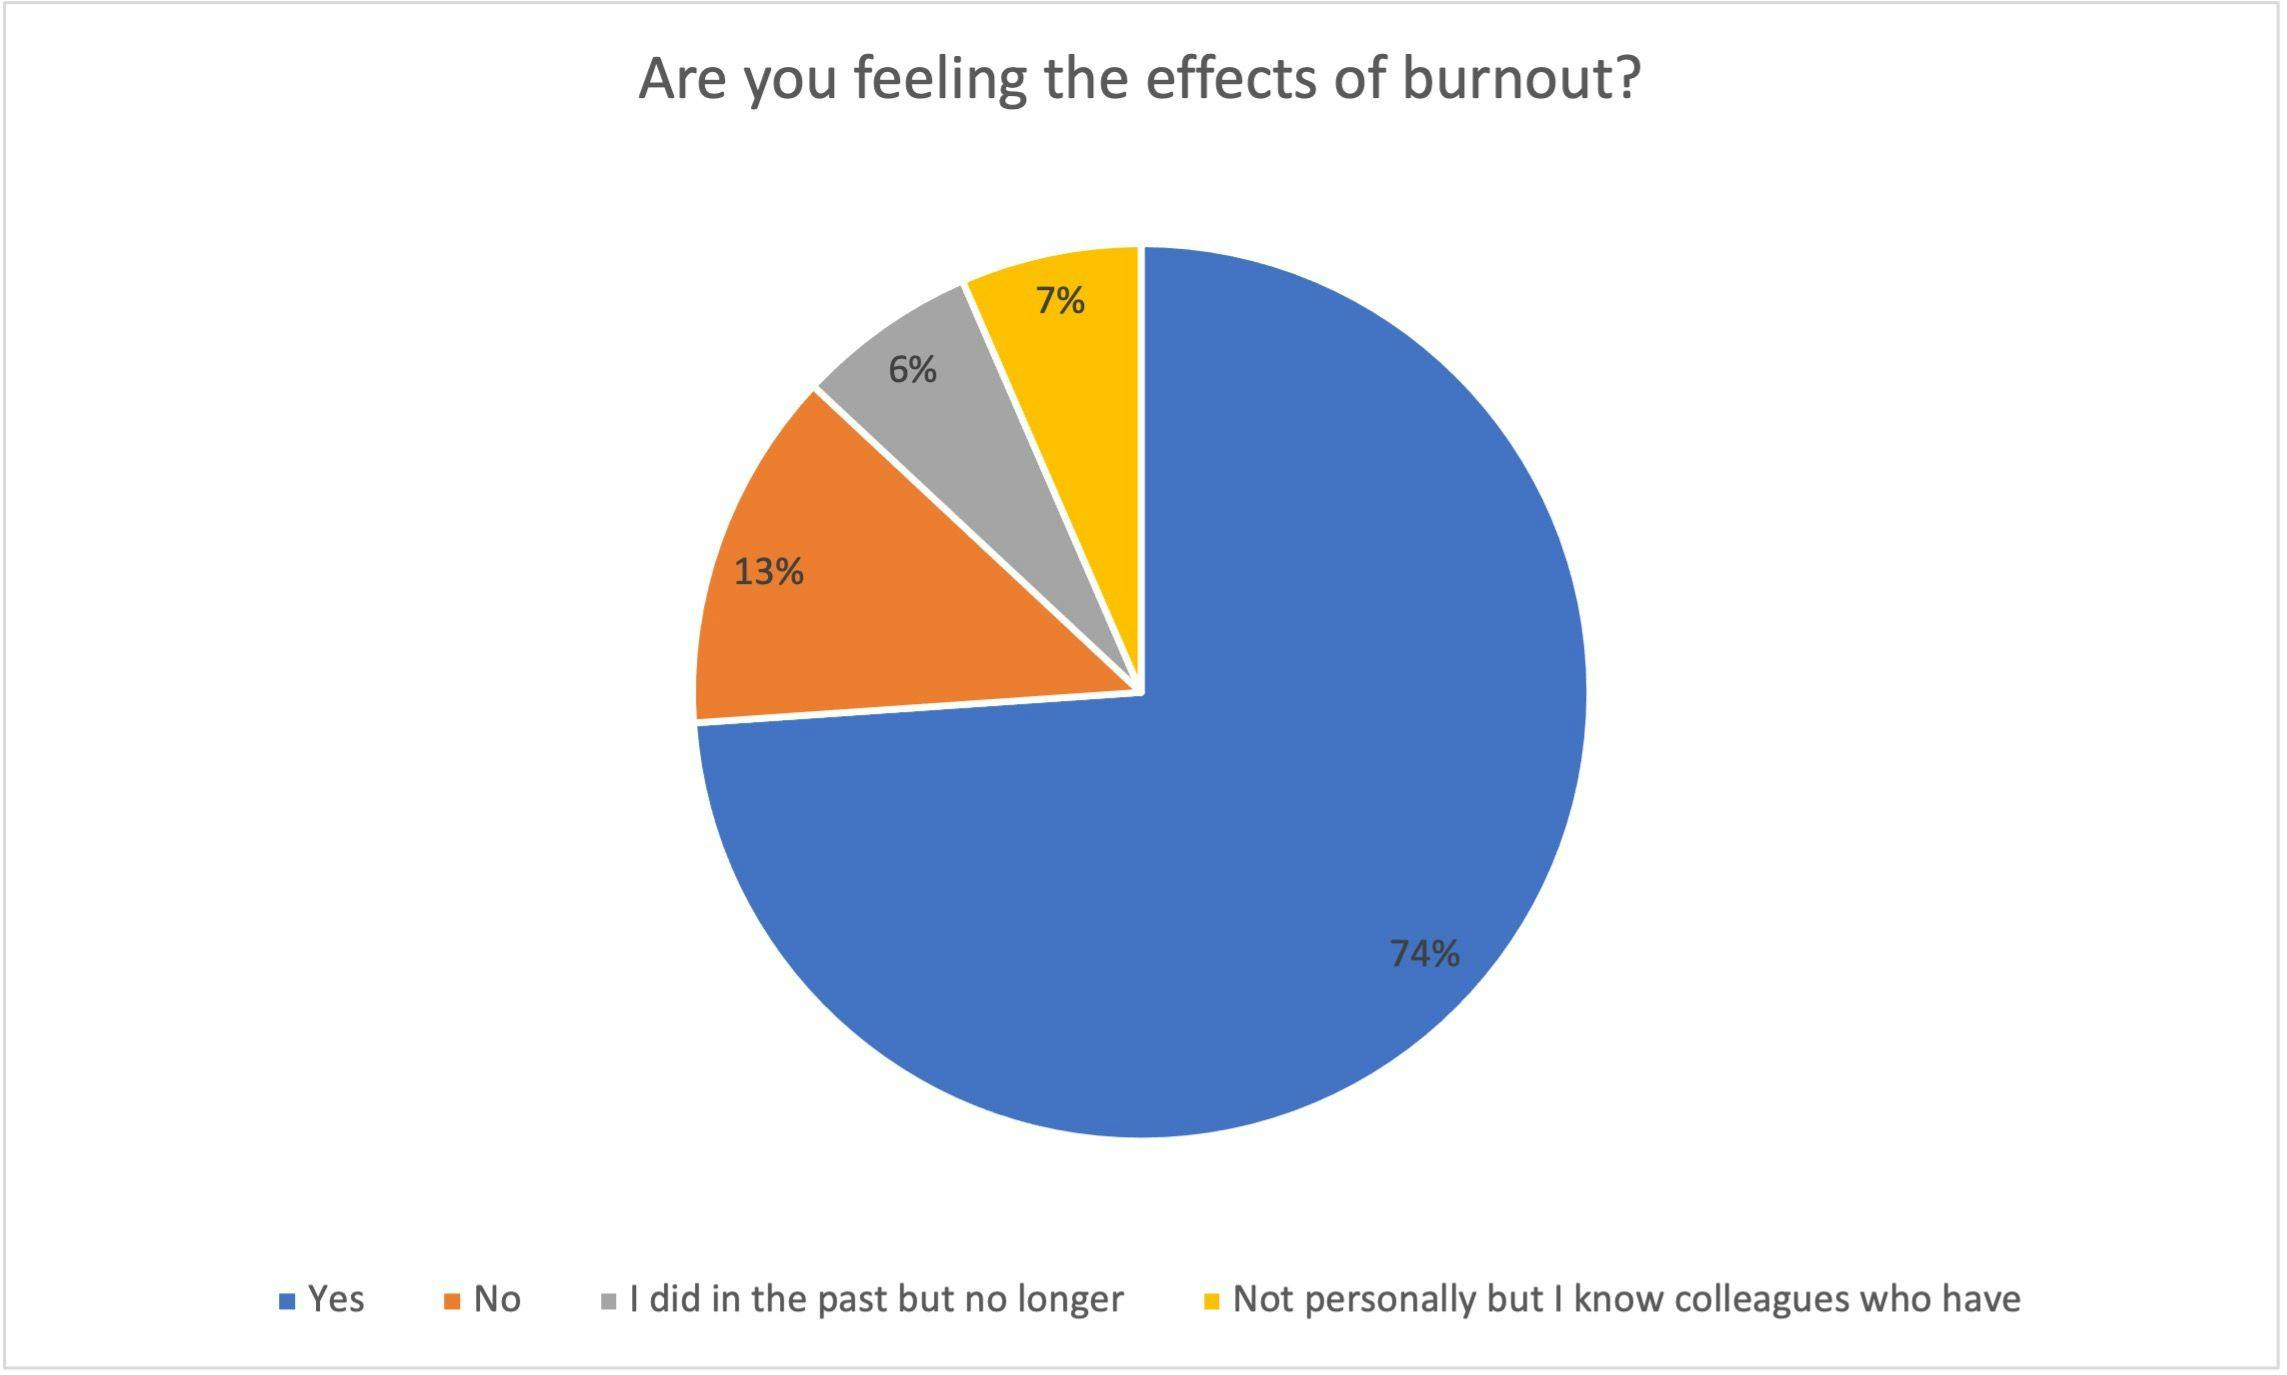 Poll results: Are you feeling the effects of burnout?